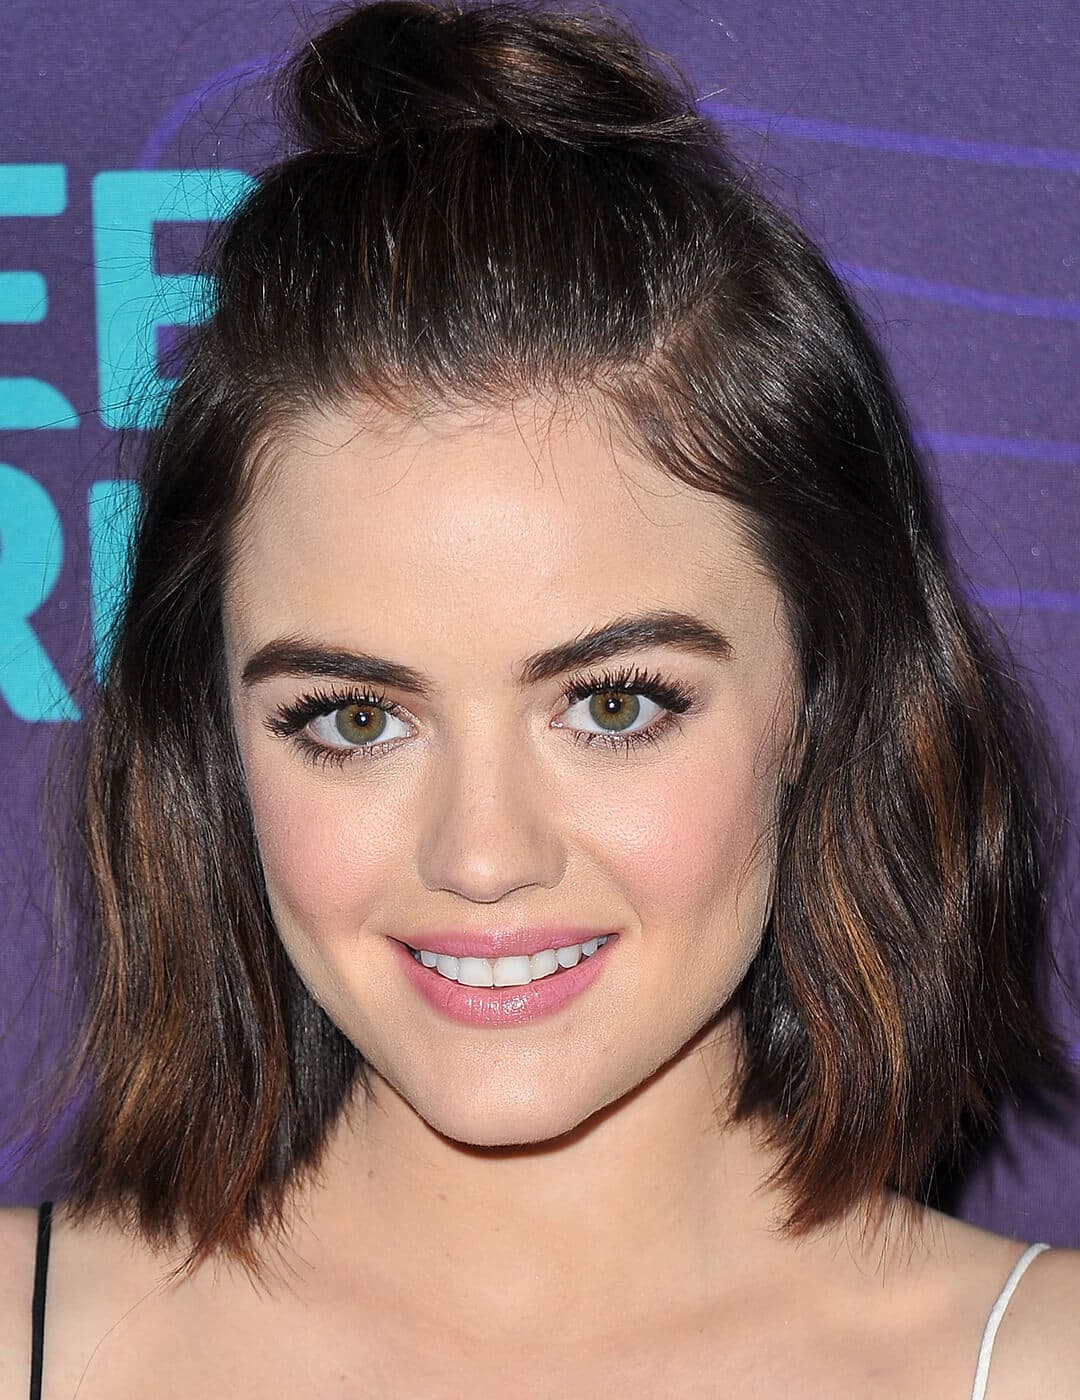 A photo of Lucy Hale with a tiny top knot hairstyle